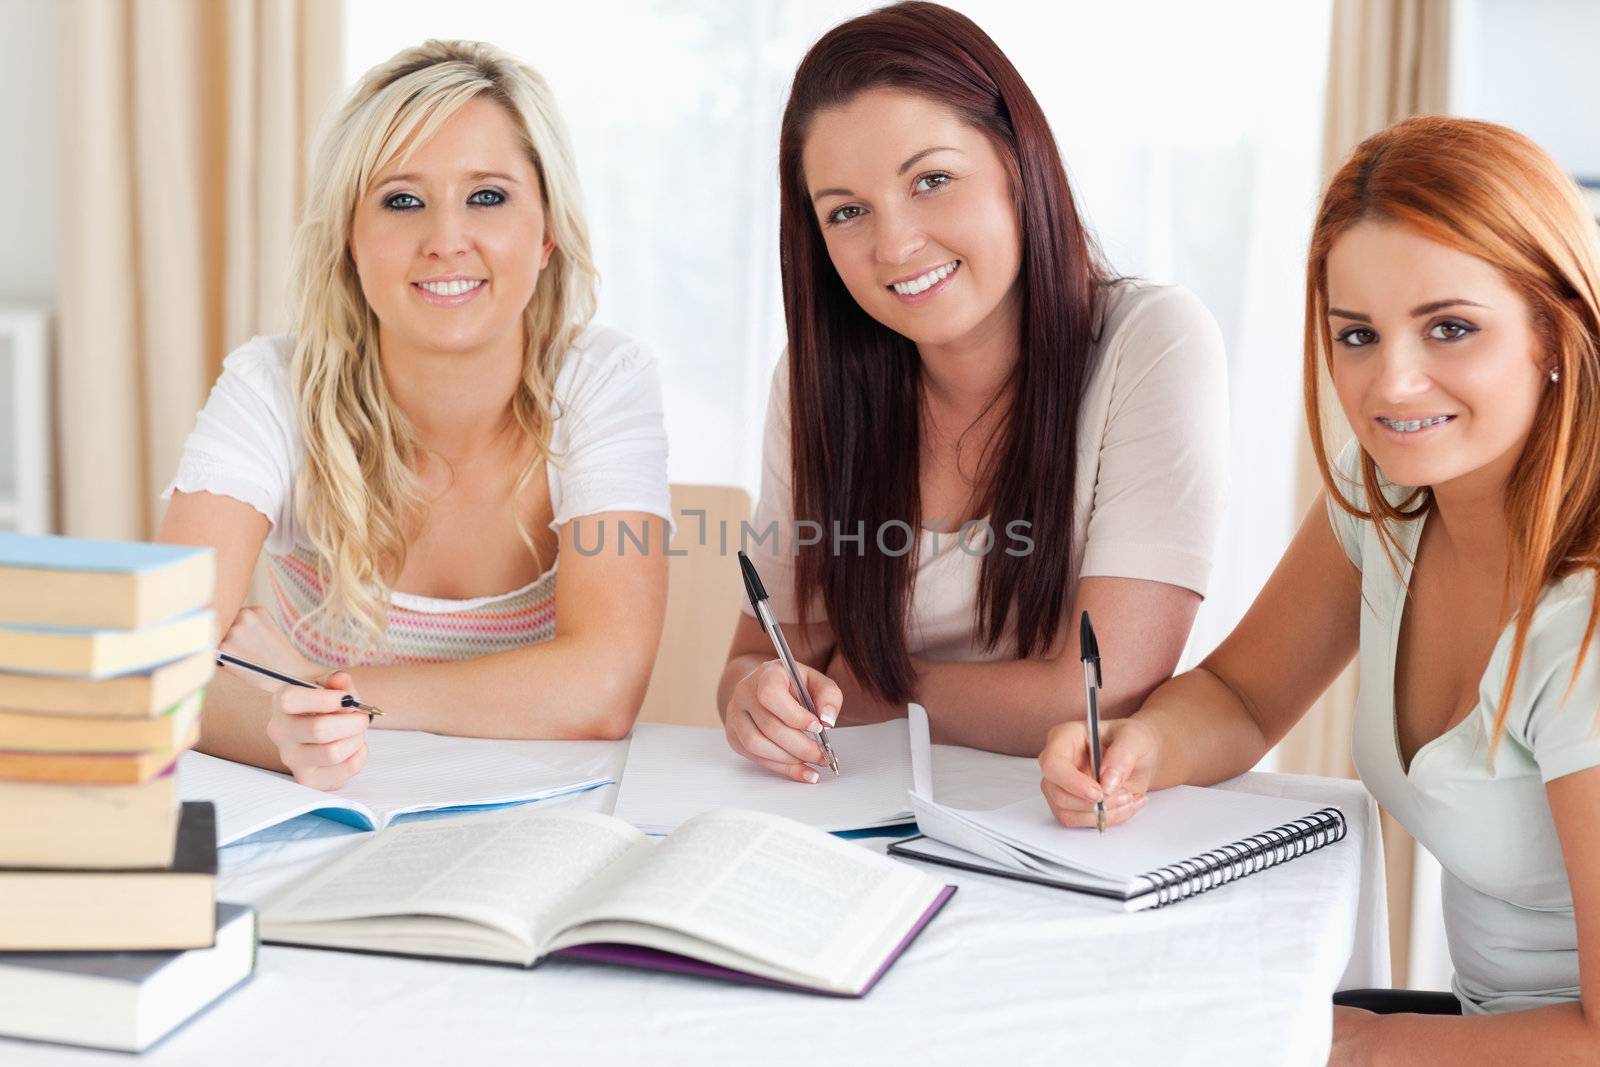 Charming Women sitting at a table learning in a kitchen